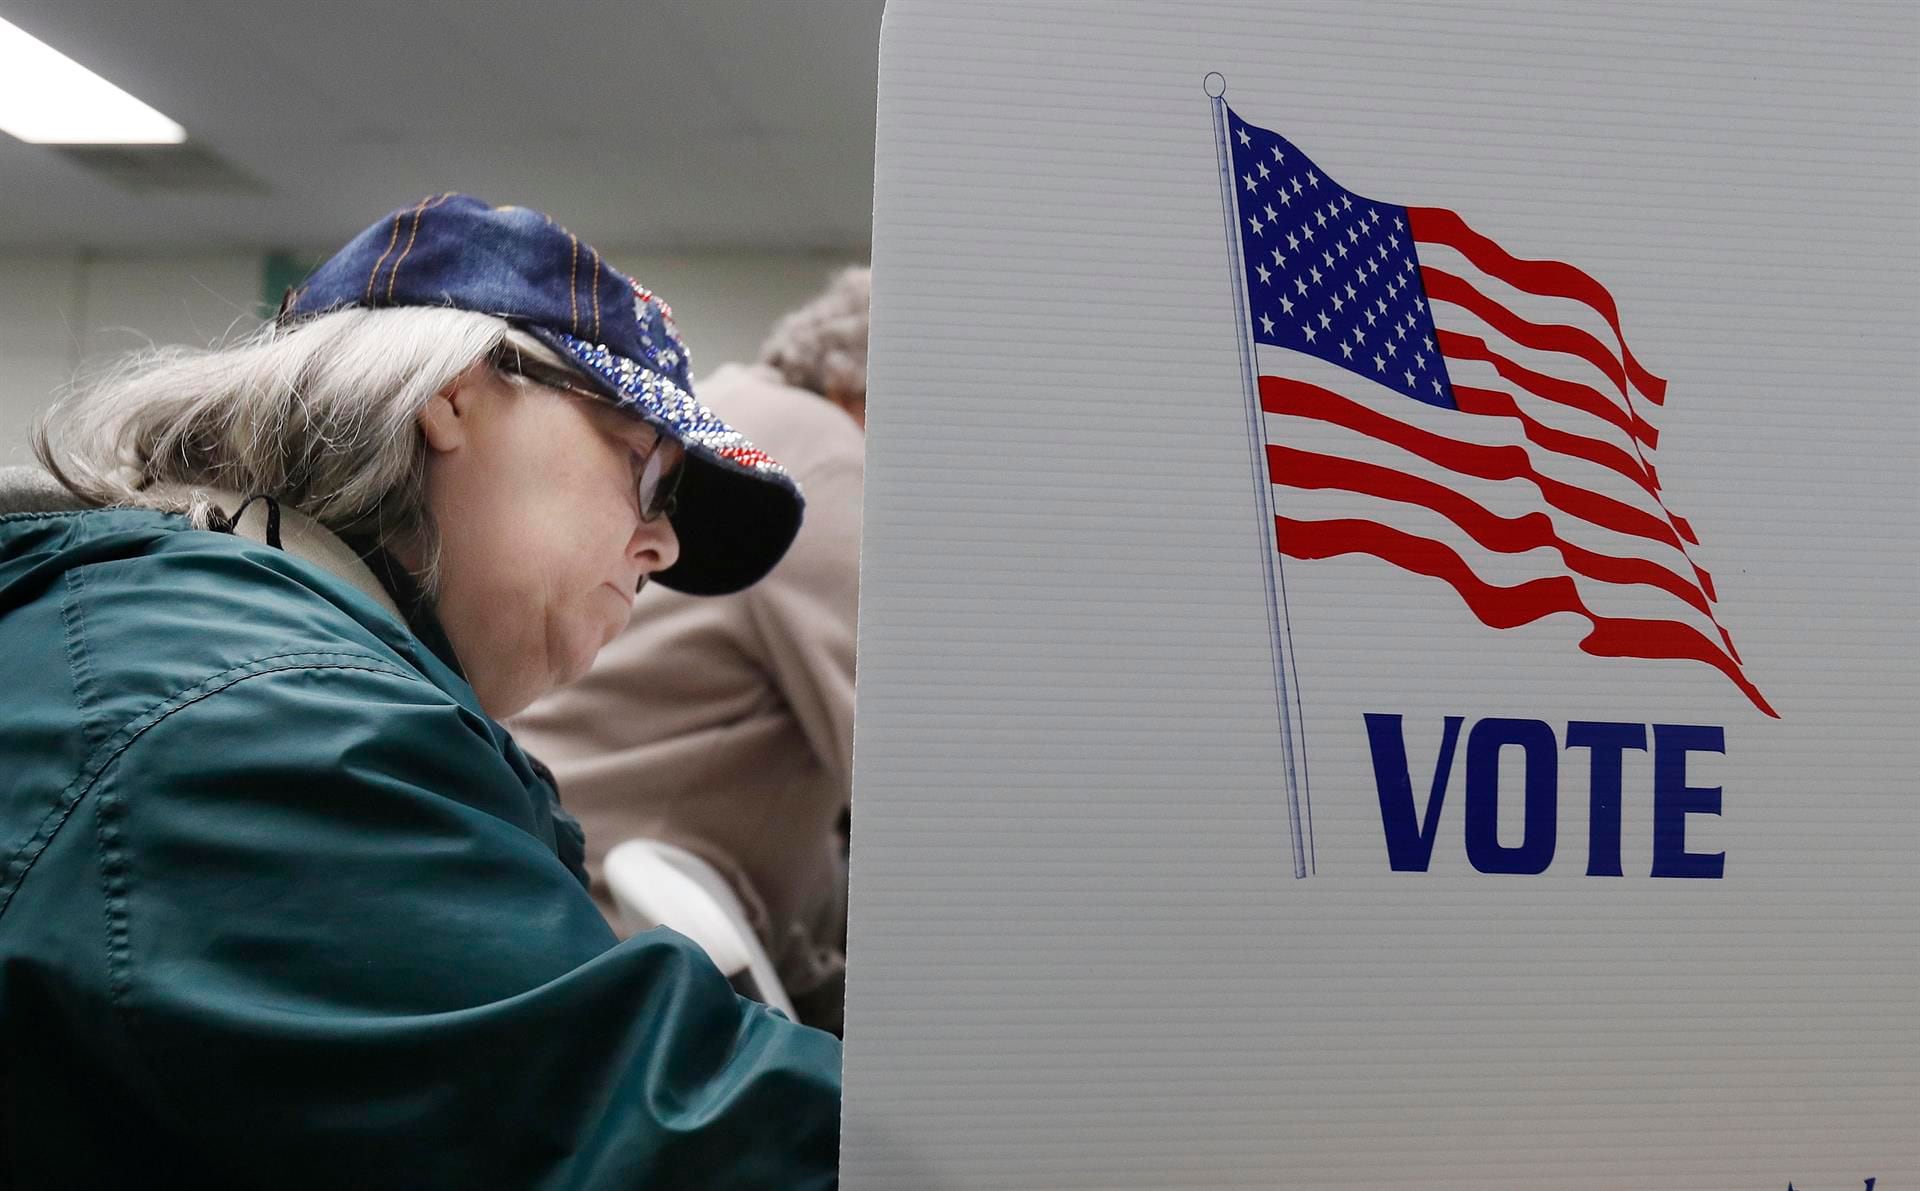 Jamie Taylor, from Freedom, Ohio, casts his ballot during the midterm elections in the United States on November 8, 2022. (EFE/EPA/DAVID MAXWELL).